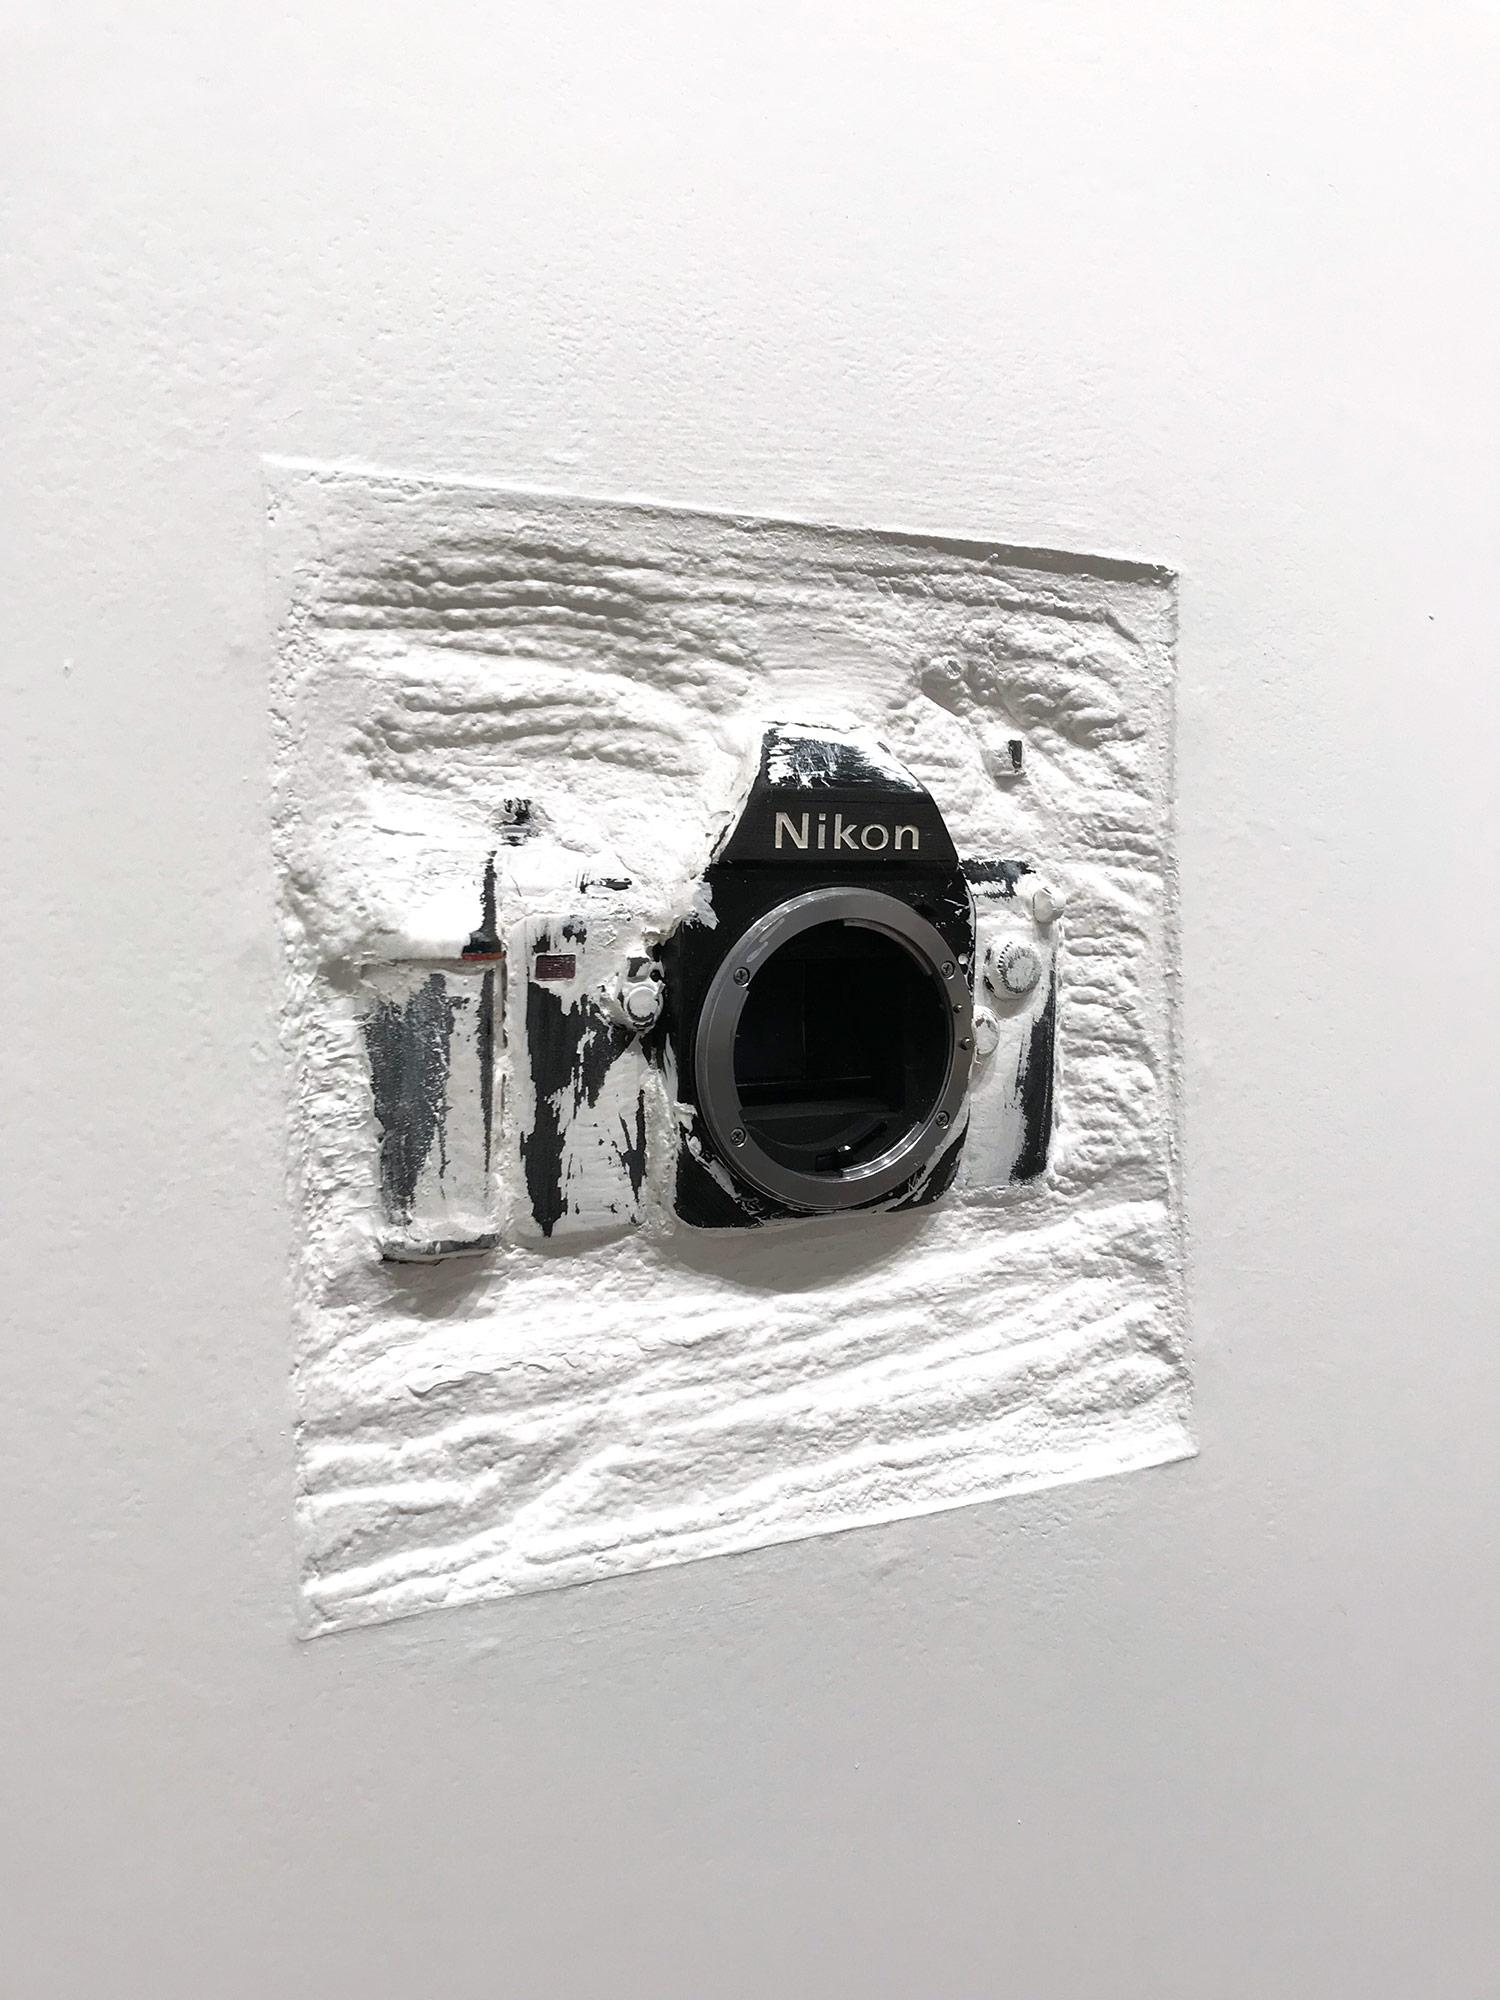 Daniel Fiorda takes objects such as old typewriters and 35mm cameras: “Discarded remnants of the industrial world,” transforming these objects into high-end art. The objects are placed in concrete, creating an altered composition. He then encases